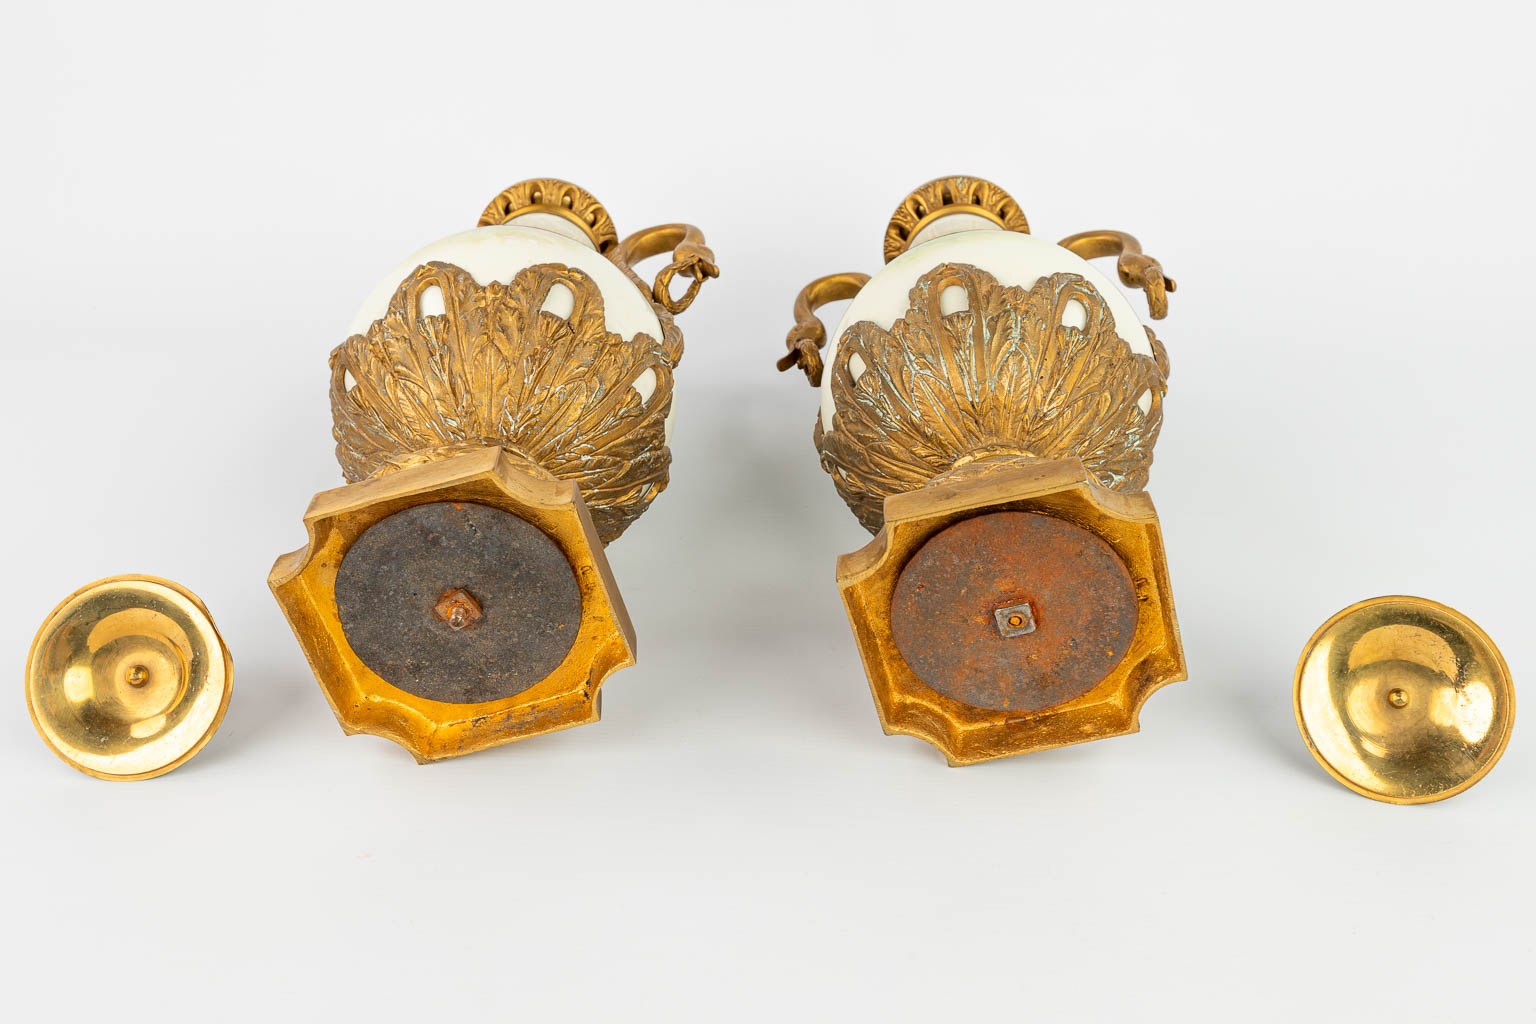 A pair of cassolettes made of porcelain mounted with bronze and finished with swans. (H:50cm)